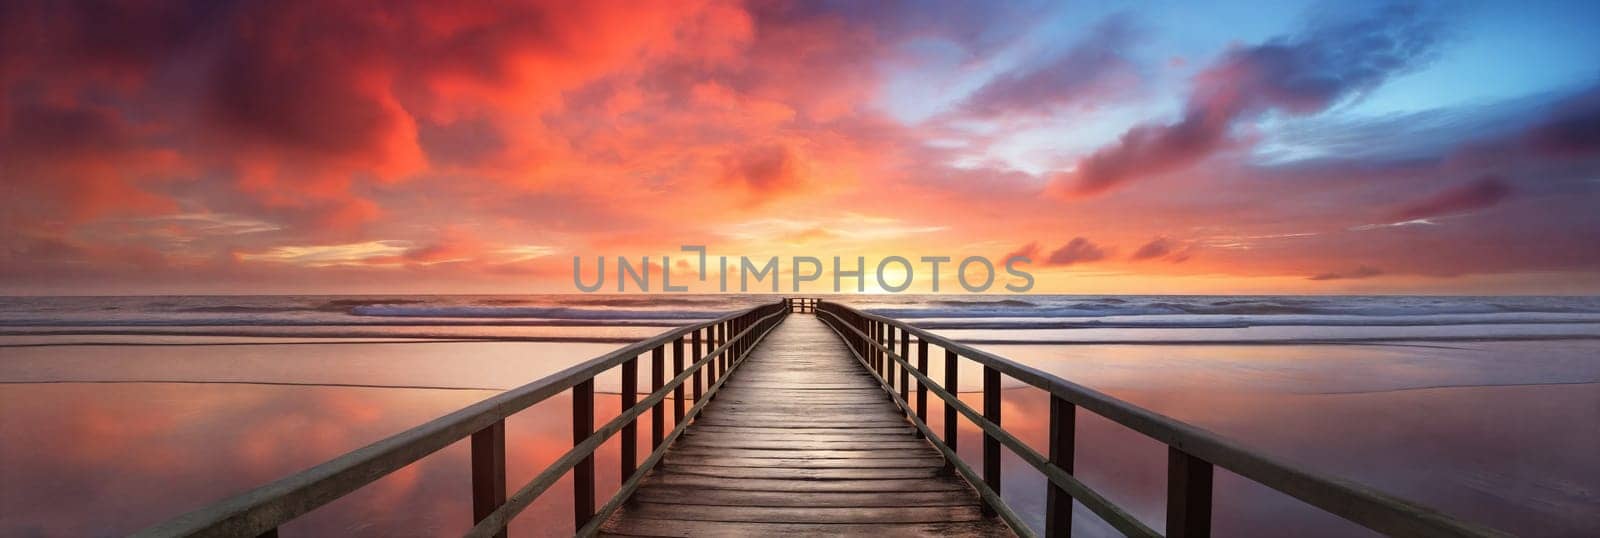 A tranquil scene of a wooden jetty stretching out into the golden sea by GoodOlga